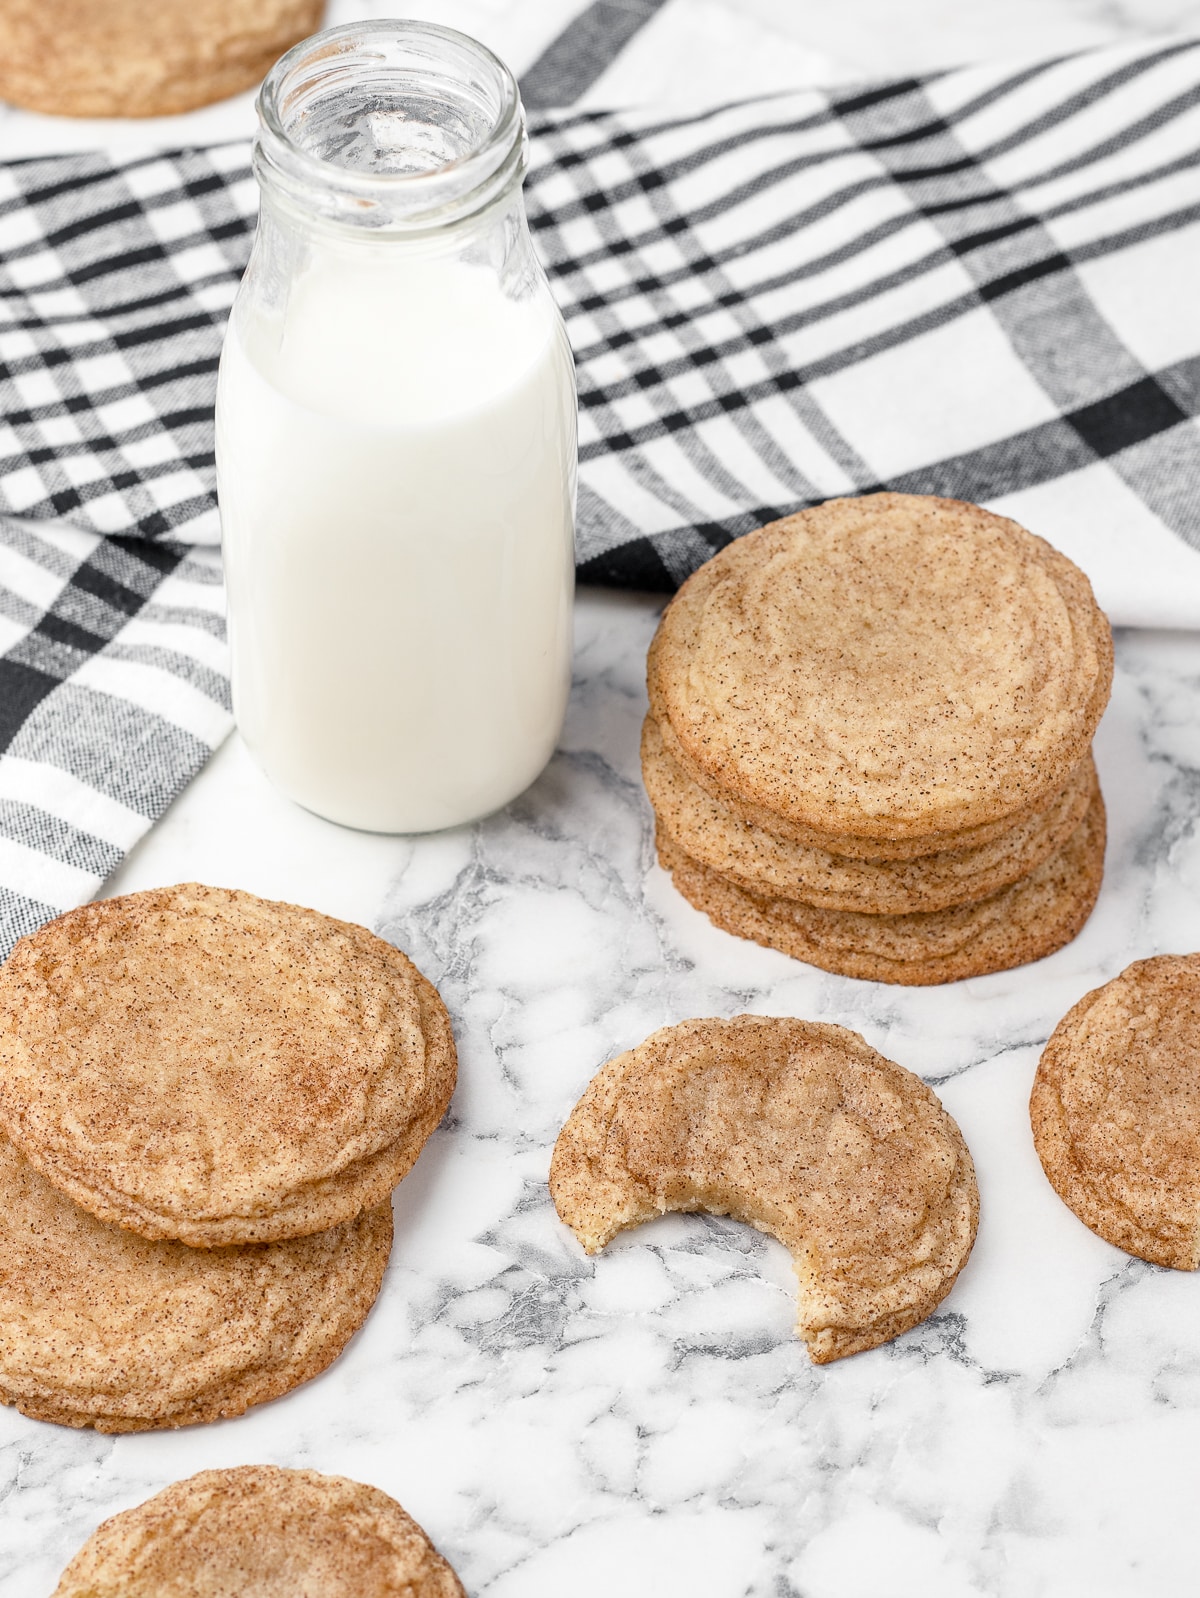 Snickerdoodle without cream of tartar cookies ready to eat with a cold jar of milk.